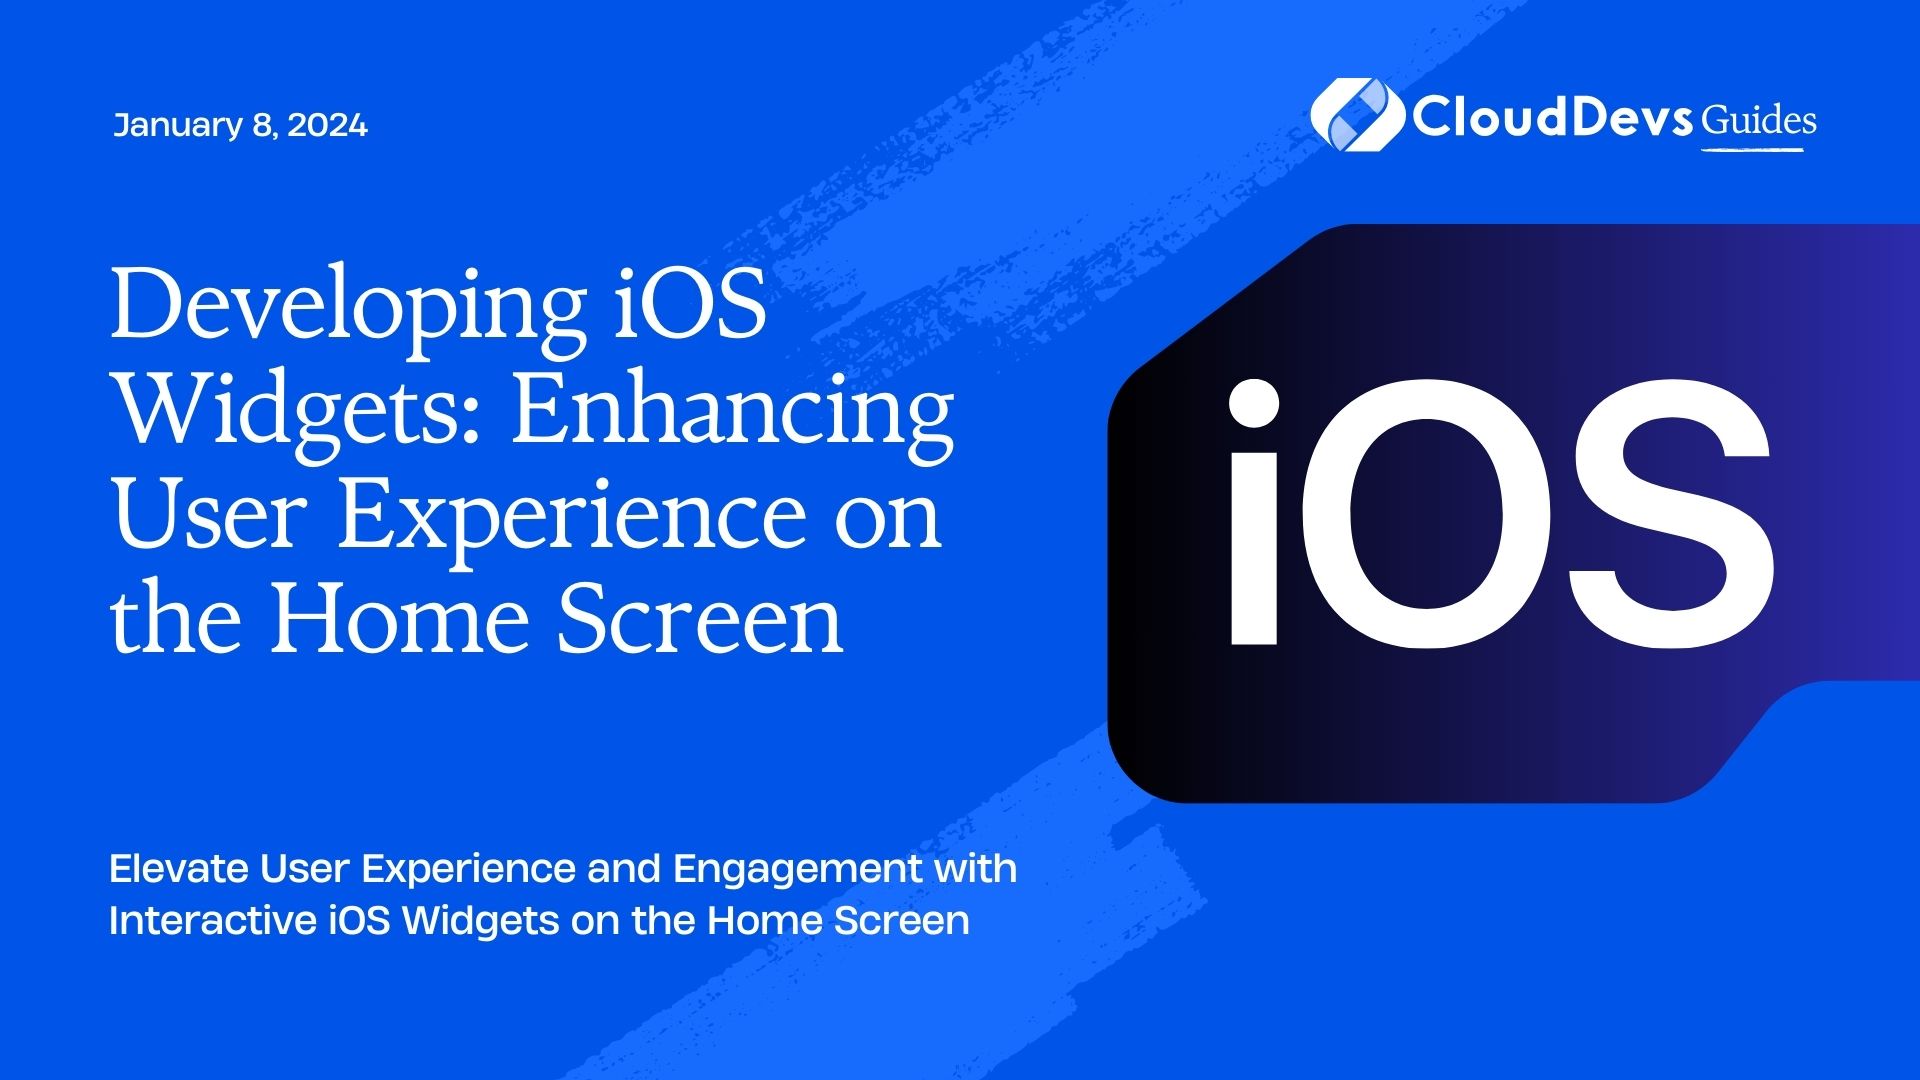 Developing iOS Widgets: Enhancing User Experience on the Home Screen